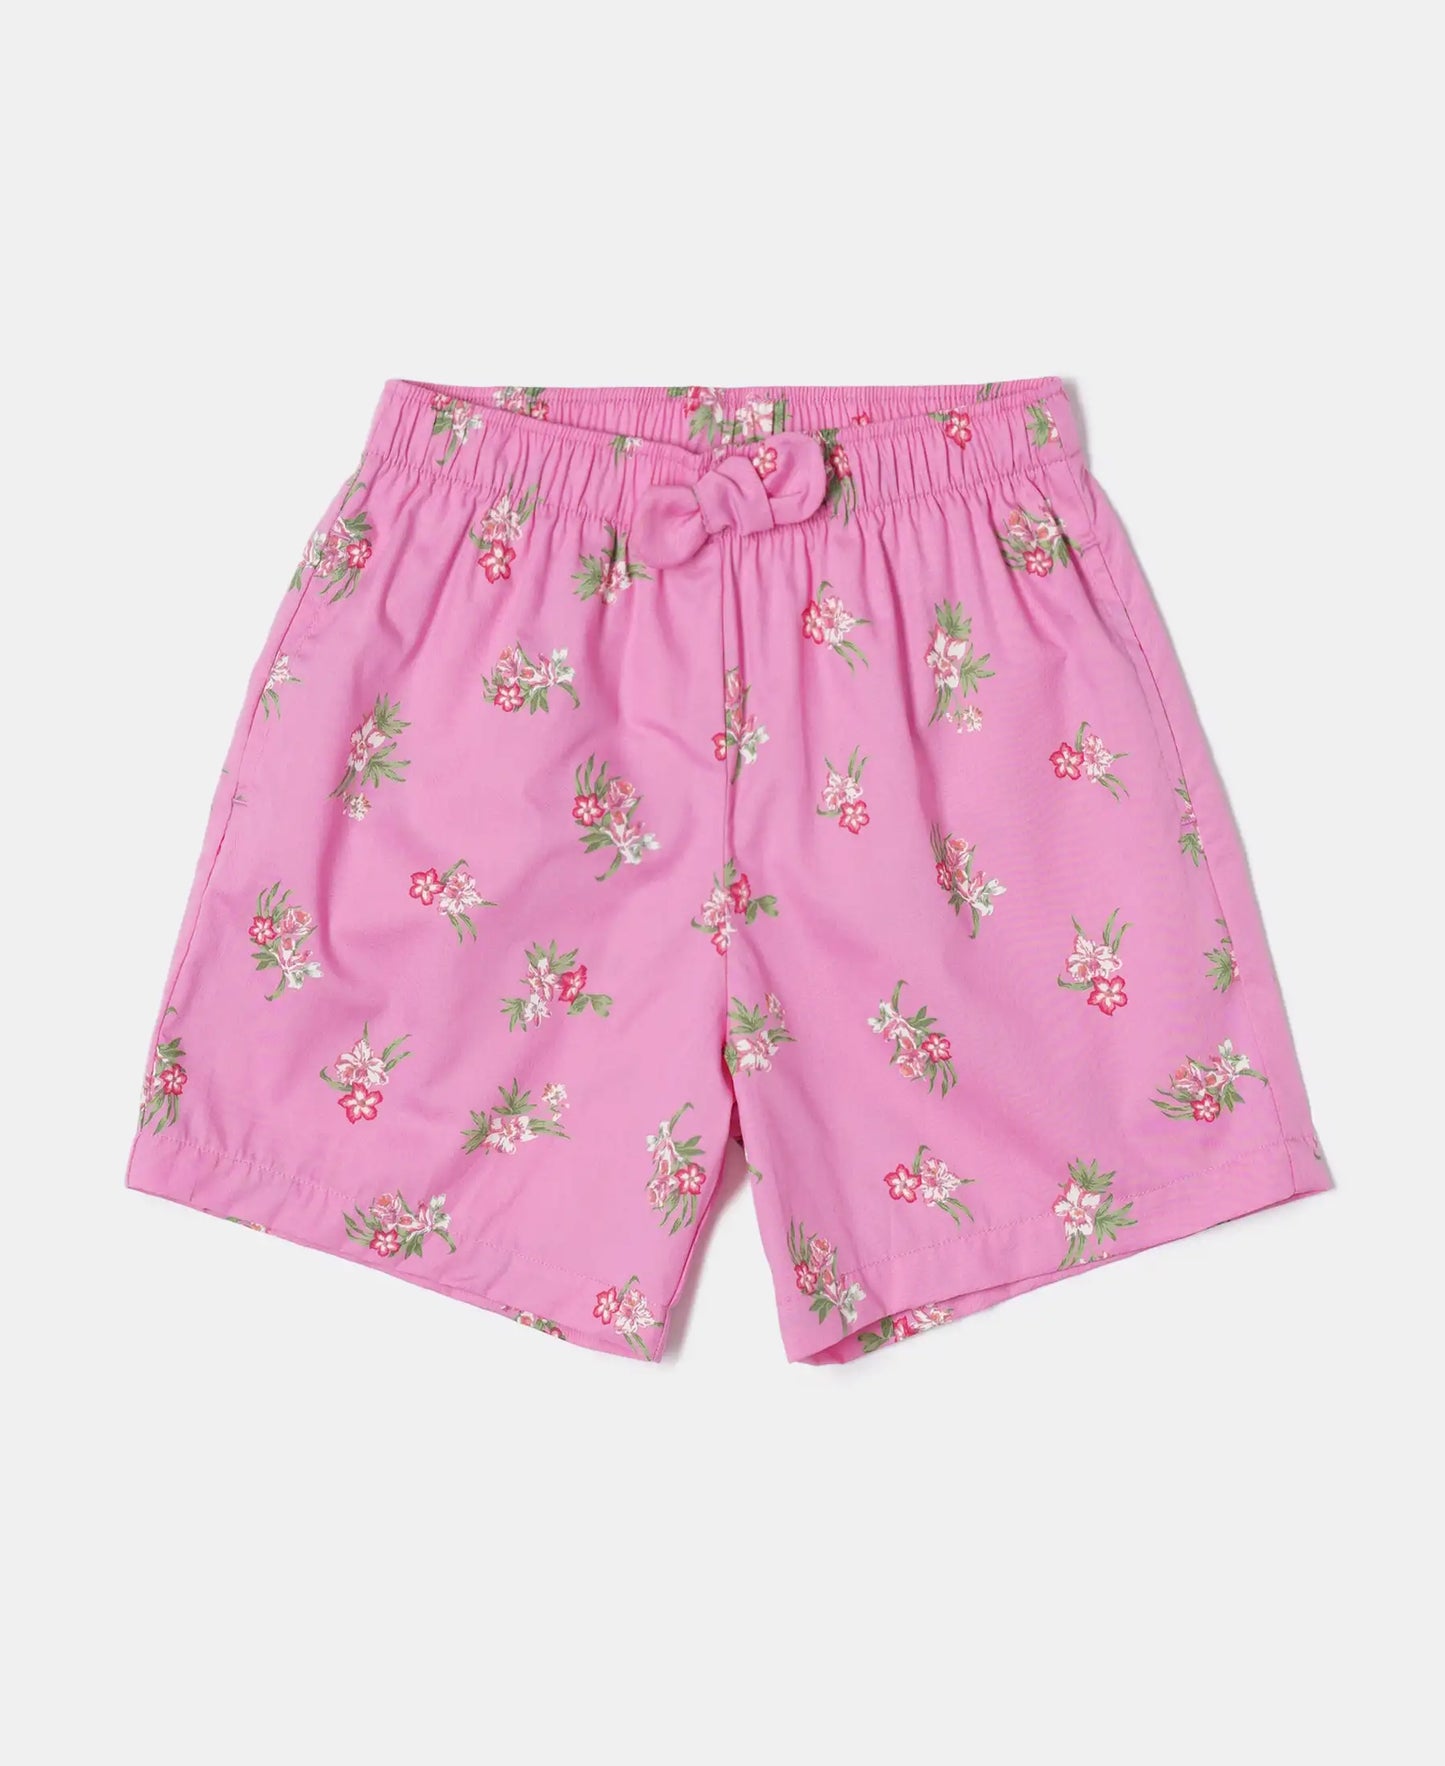 Super Combed Cotton Woven Printed Shorts - Assorted Color & Printed-4